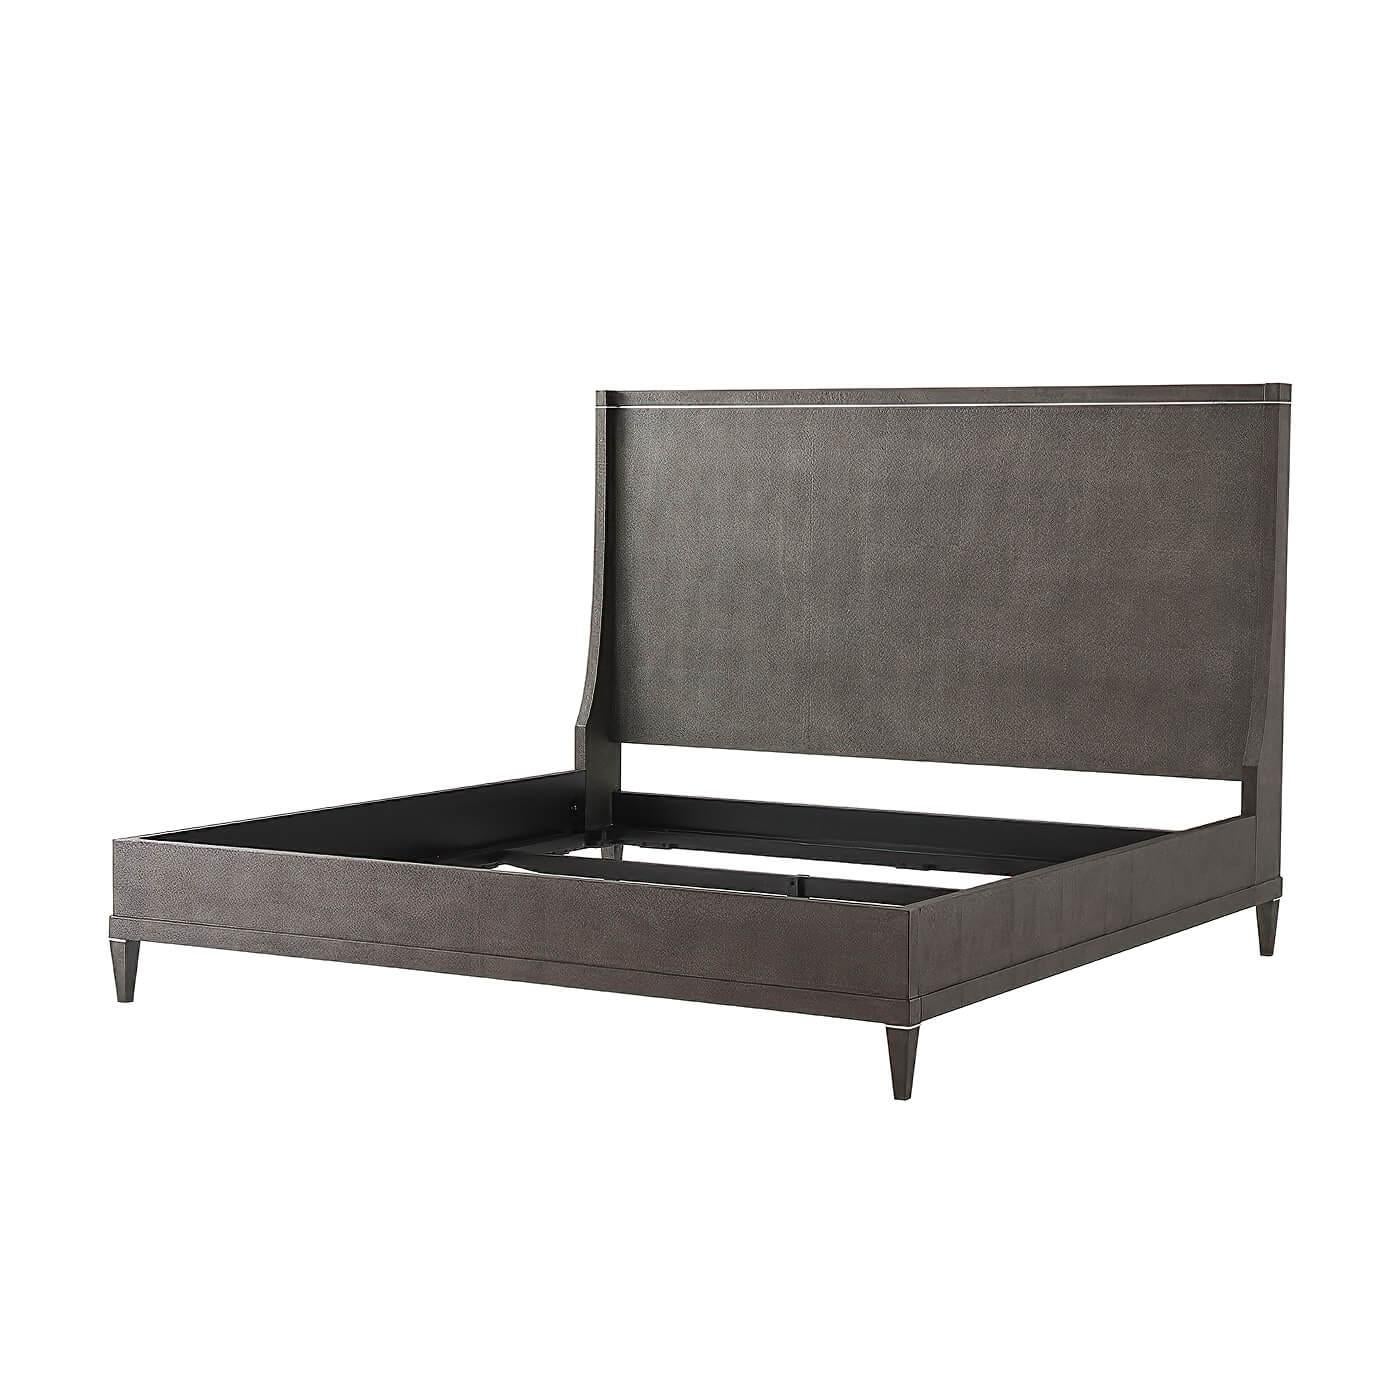 A Classic modern tempest Finish shagreen embossed leather wrapped California king size bed. The headboard with down swept wings, with polished nickel molding details, a stepped rail frame on square tapered legs.

Dimensions: 77.5